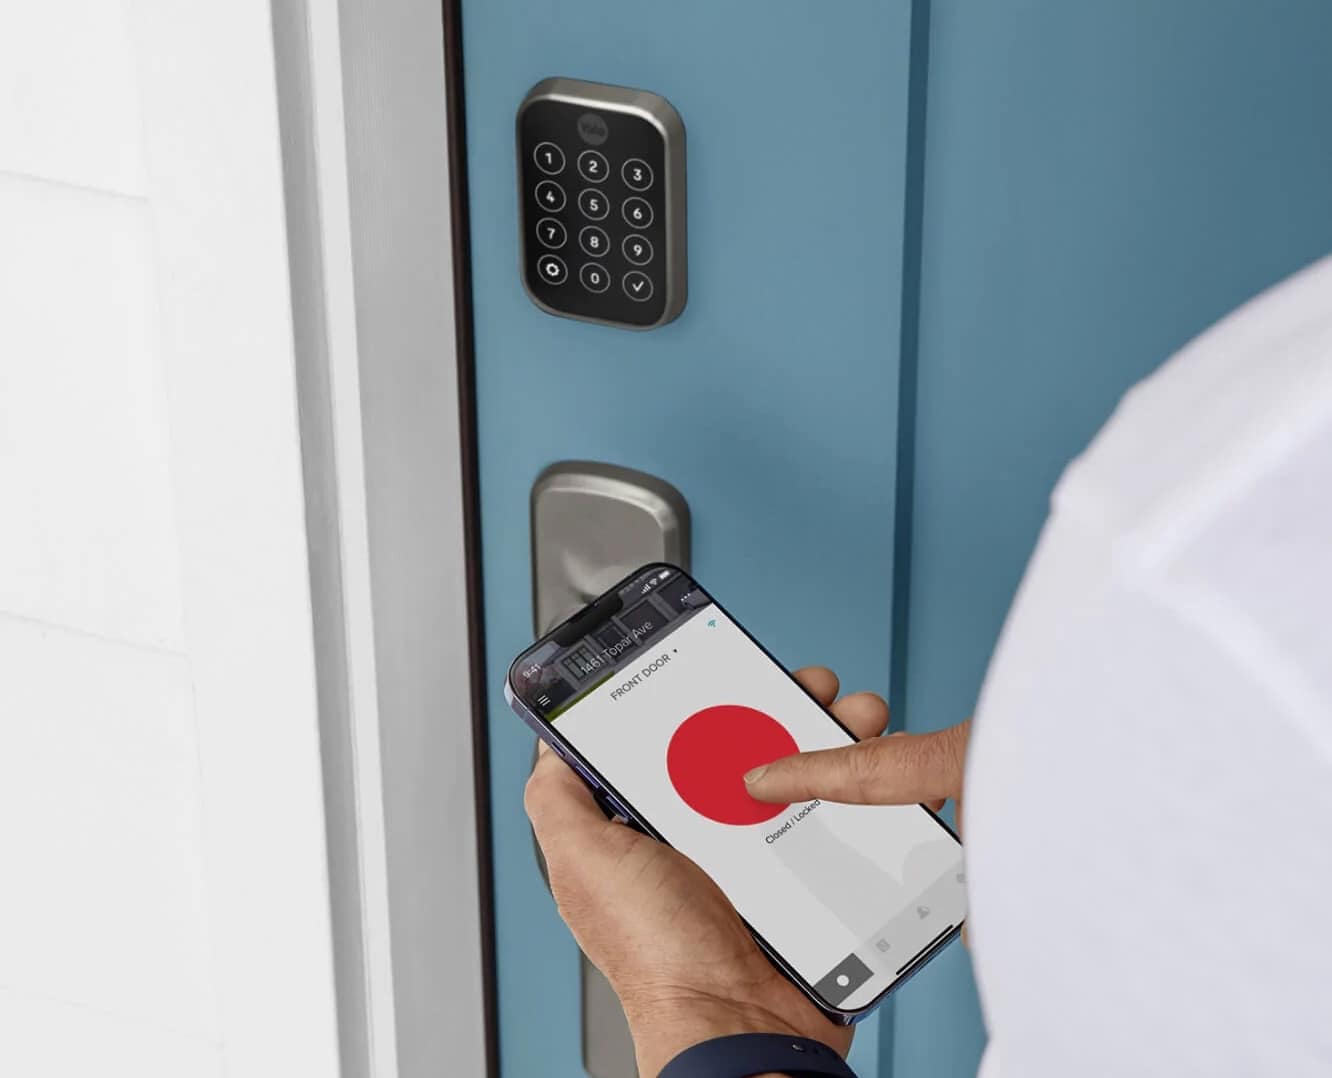 You can use a smartphone or the touchscreen or keypad on the lock.